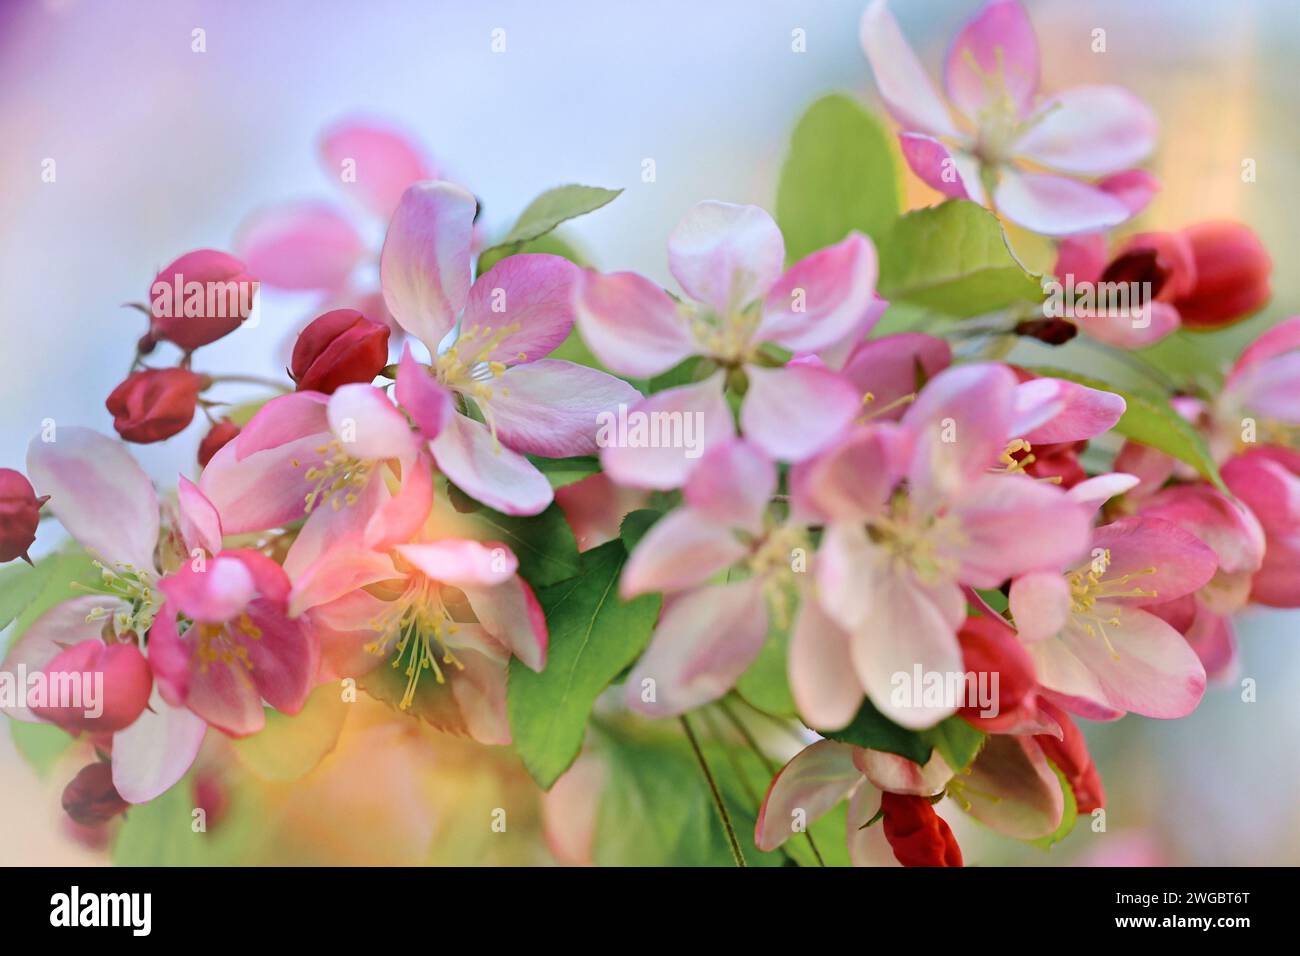 Close-up of Apple blossom flowers on a tree in spring, Switzerland Stock Photo